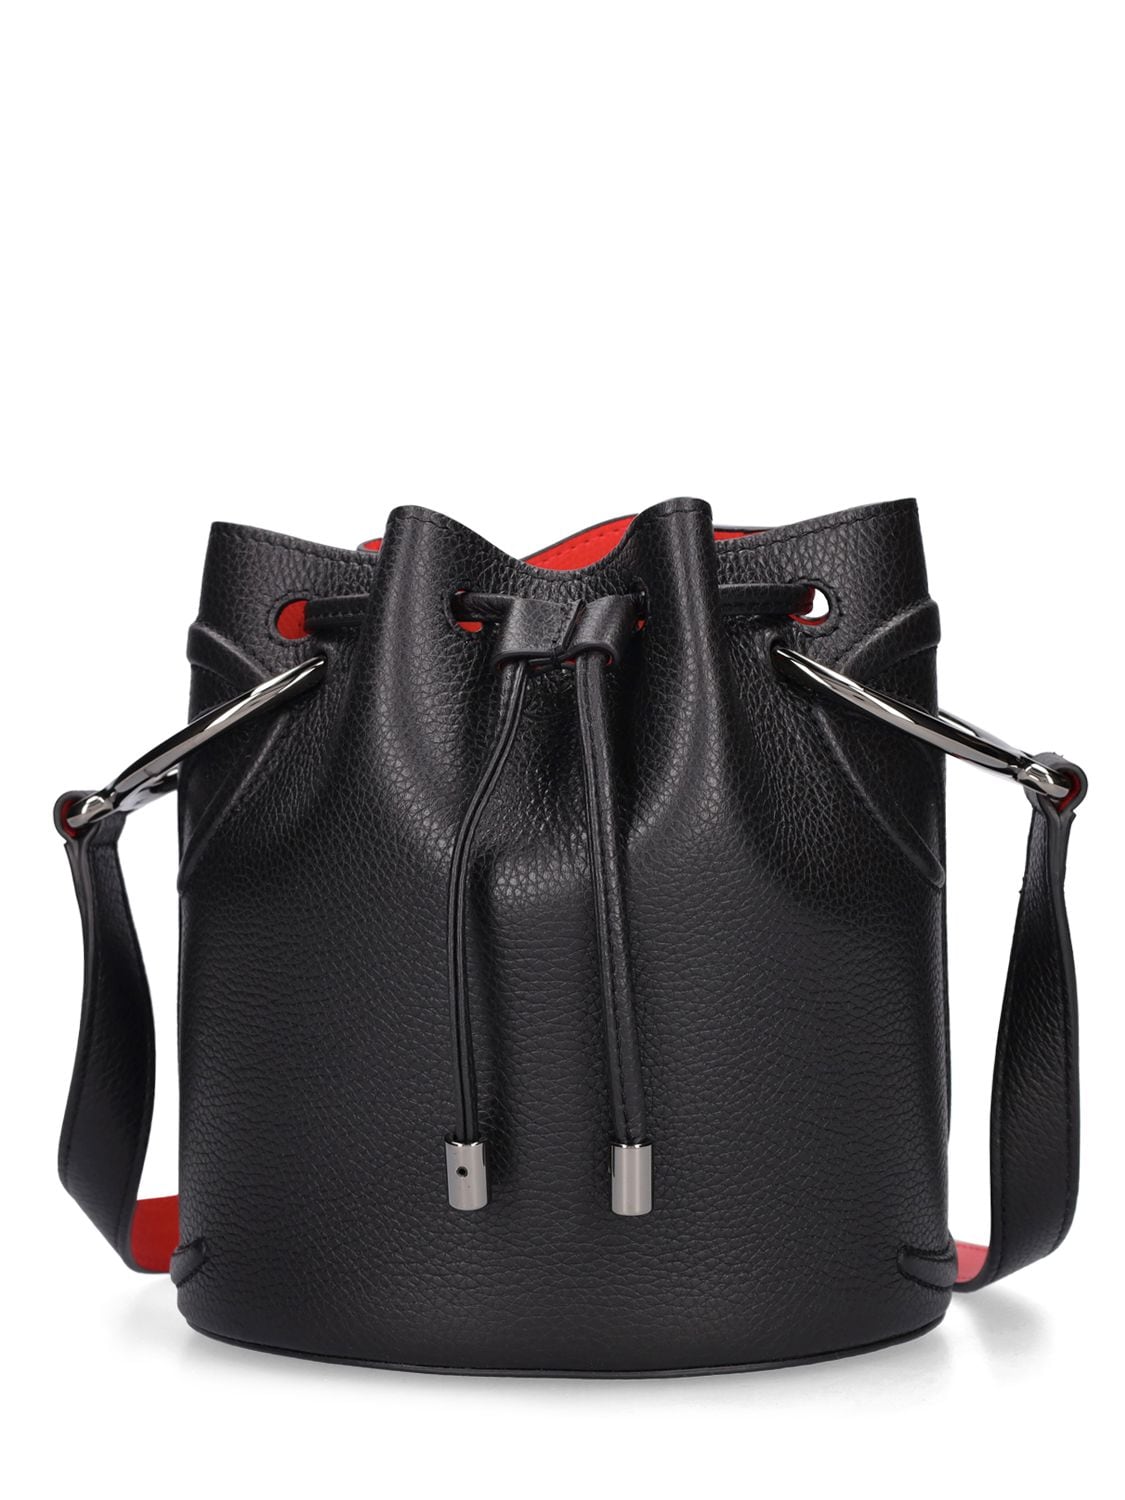 Christian Louboutin By My Side Leather Bucket Bag